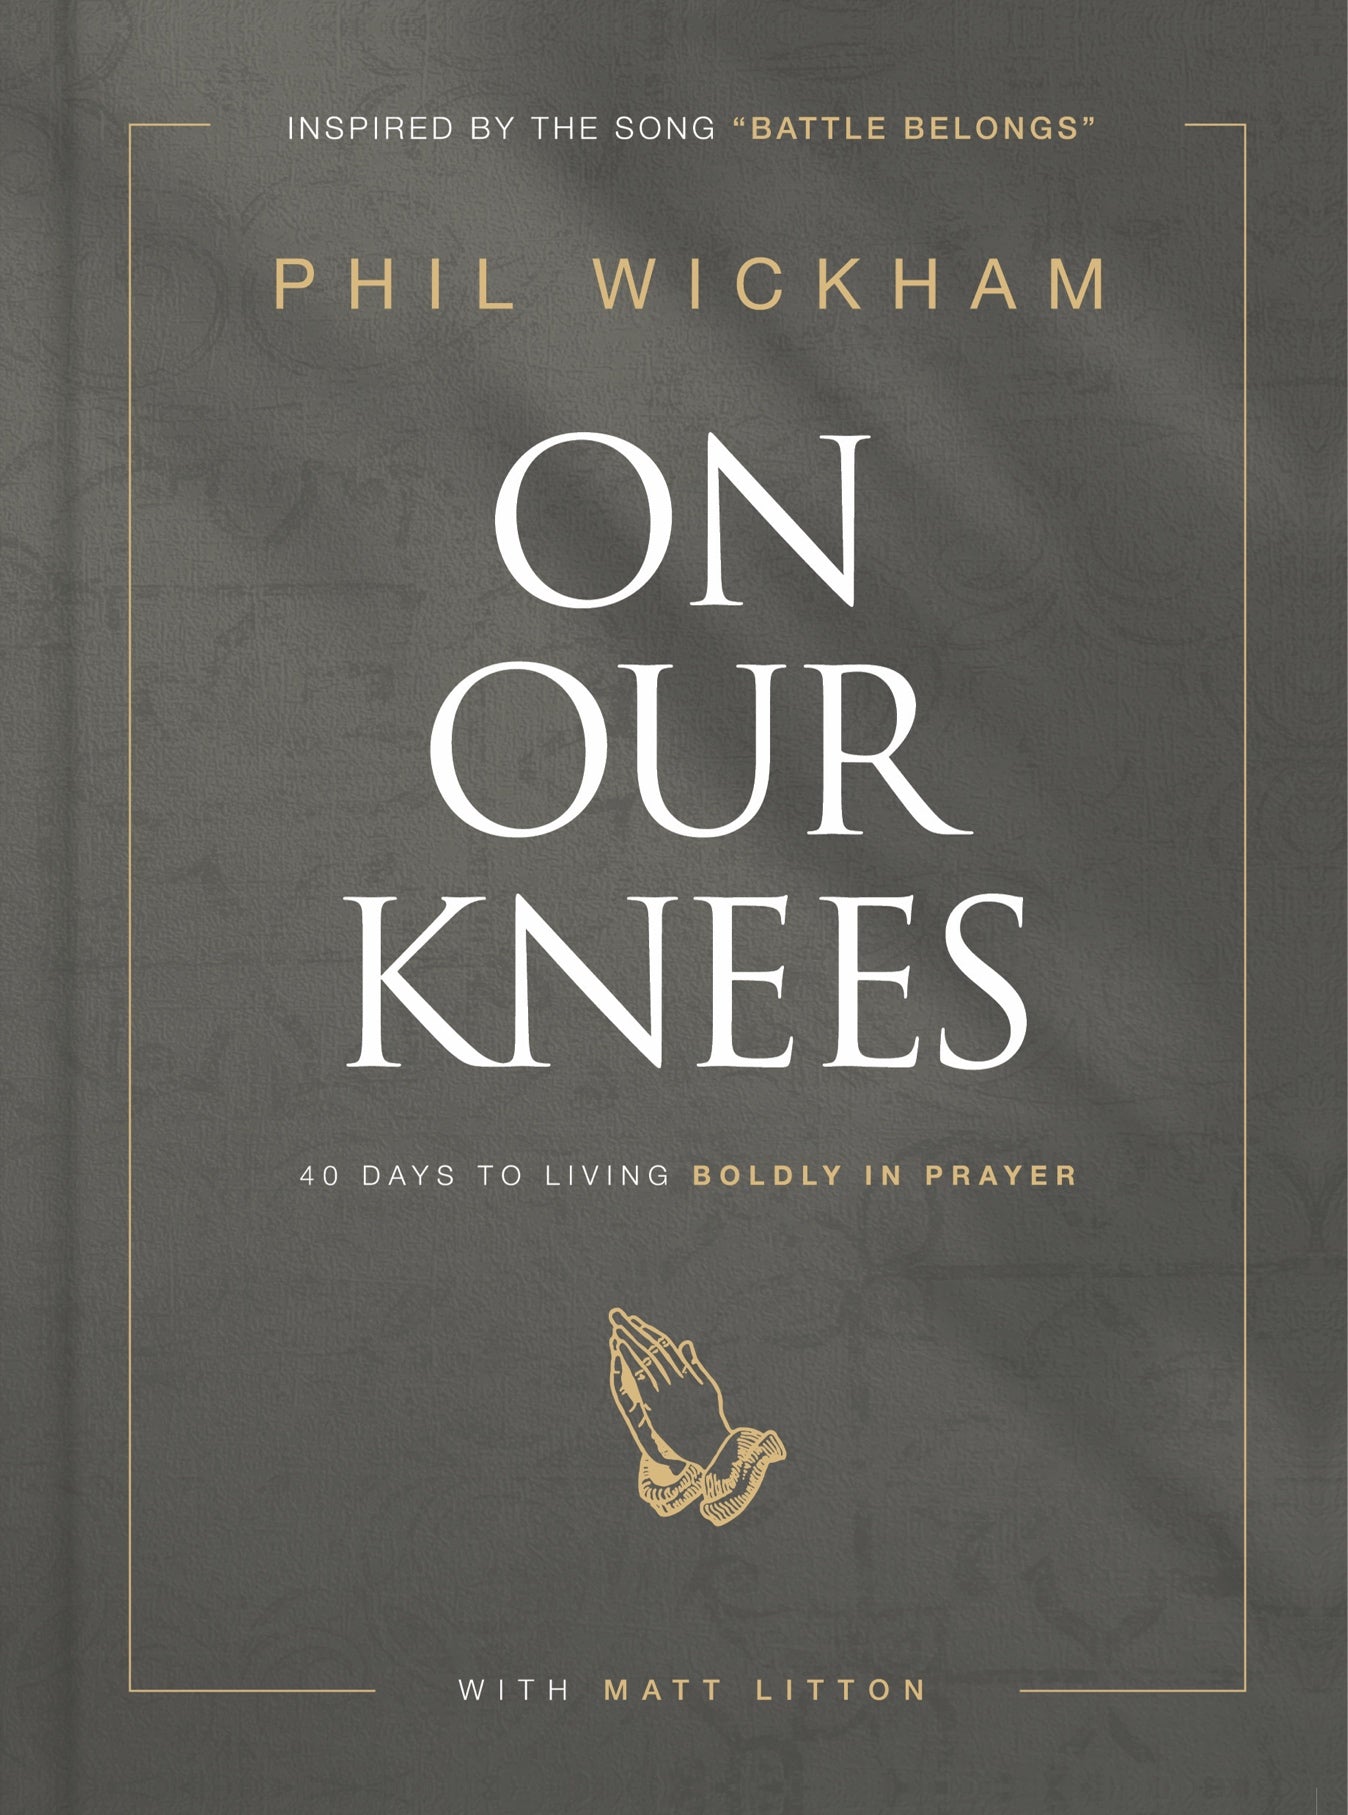 Knees:　On　Days　Boldly　–　Our　Books　40　K-LOVE　to　Living　in　Prayer